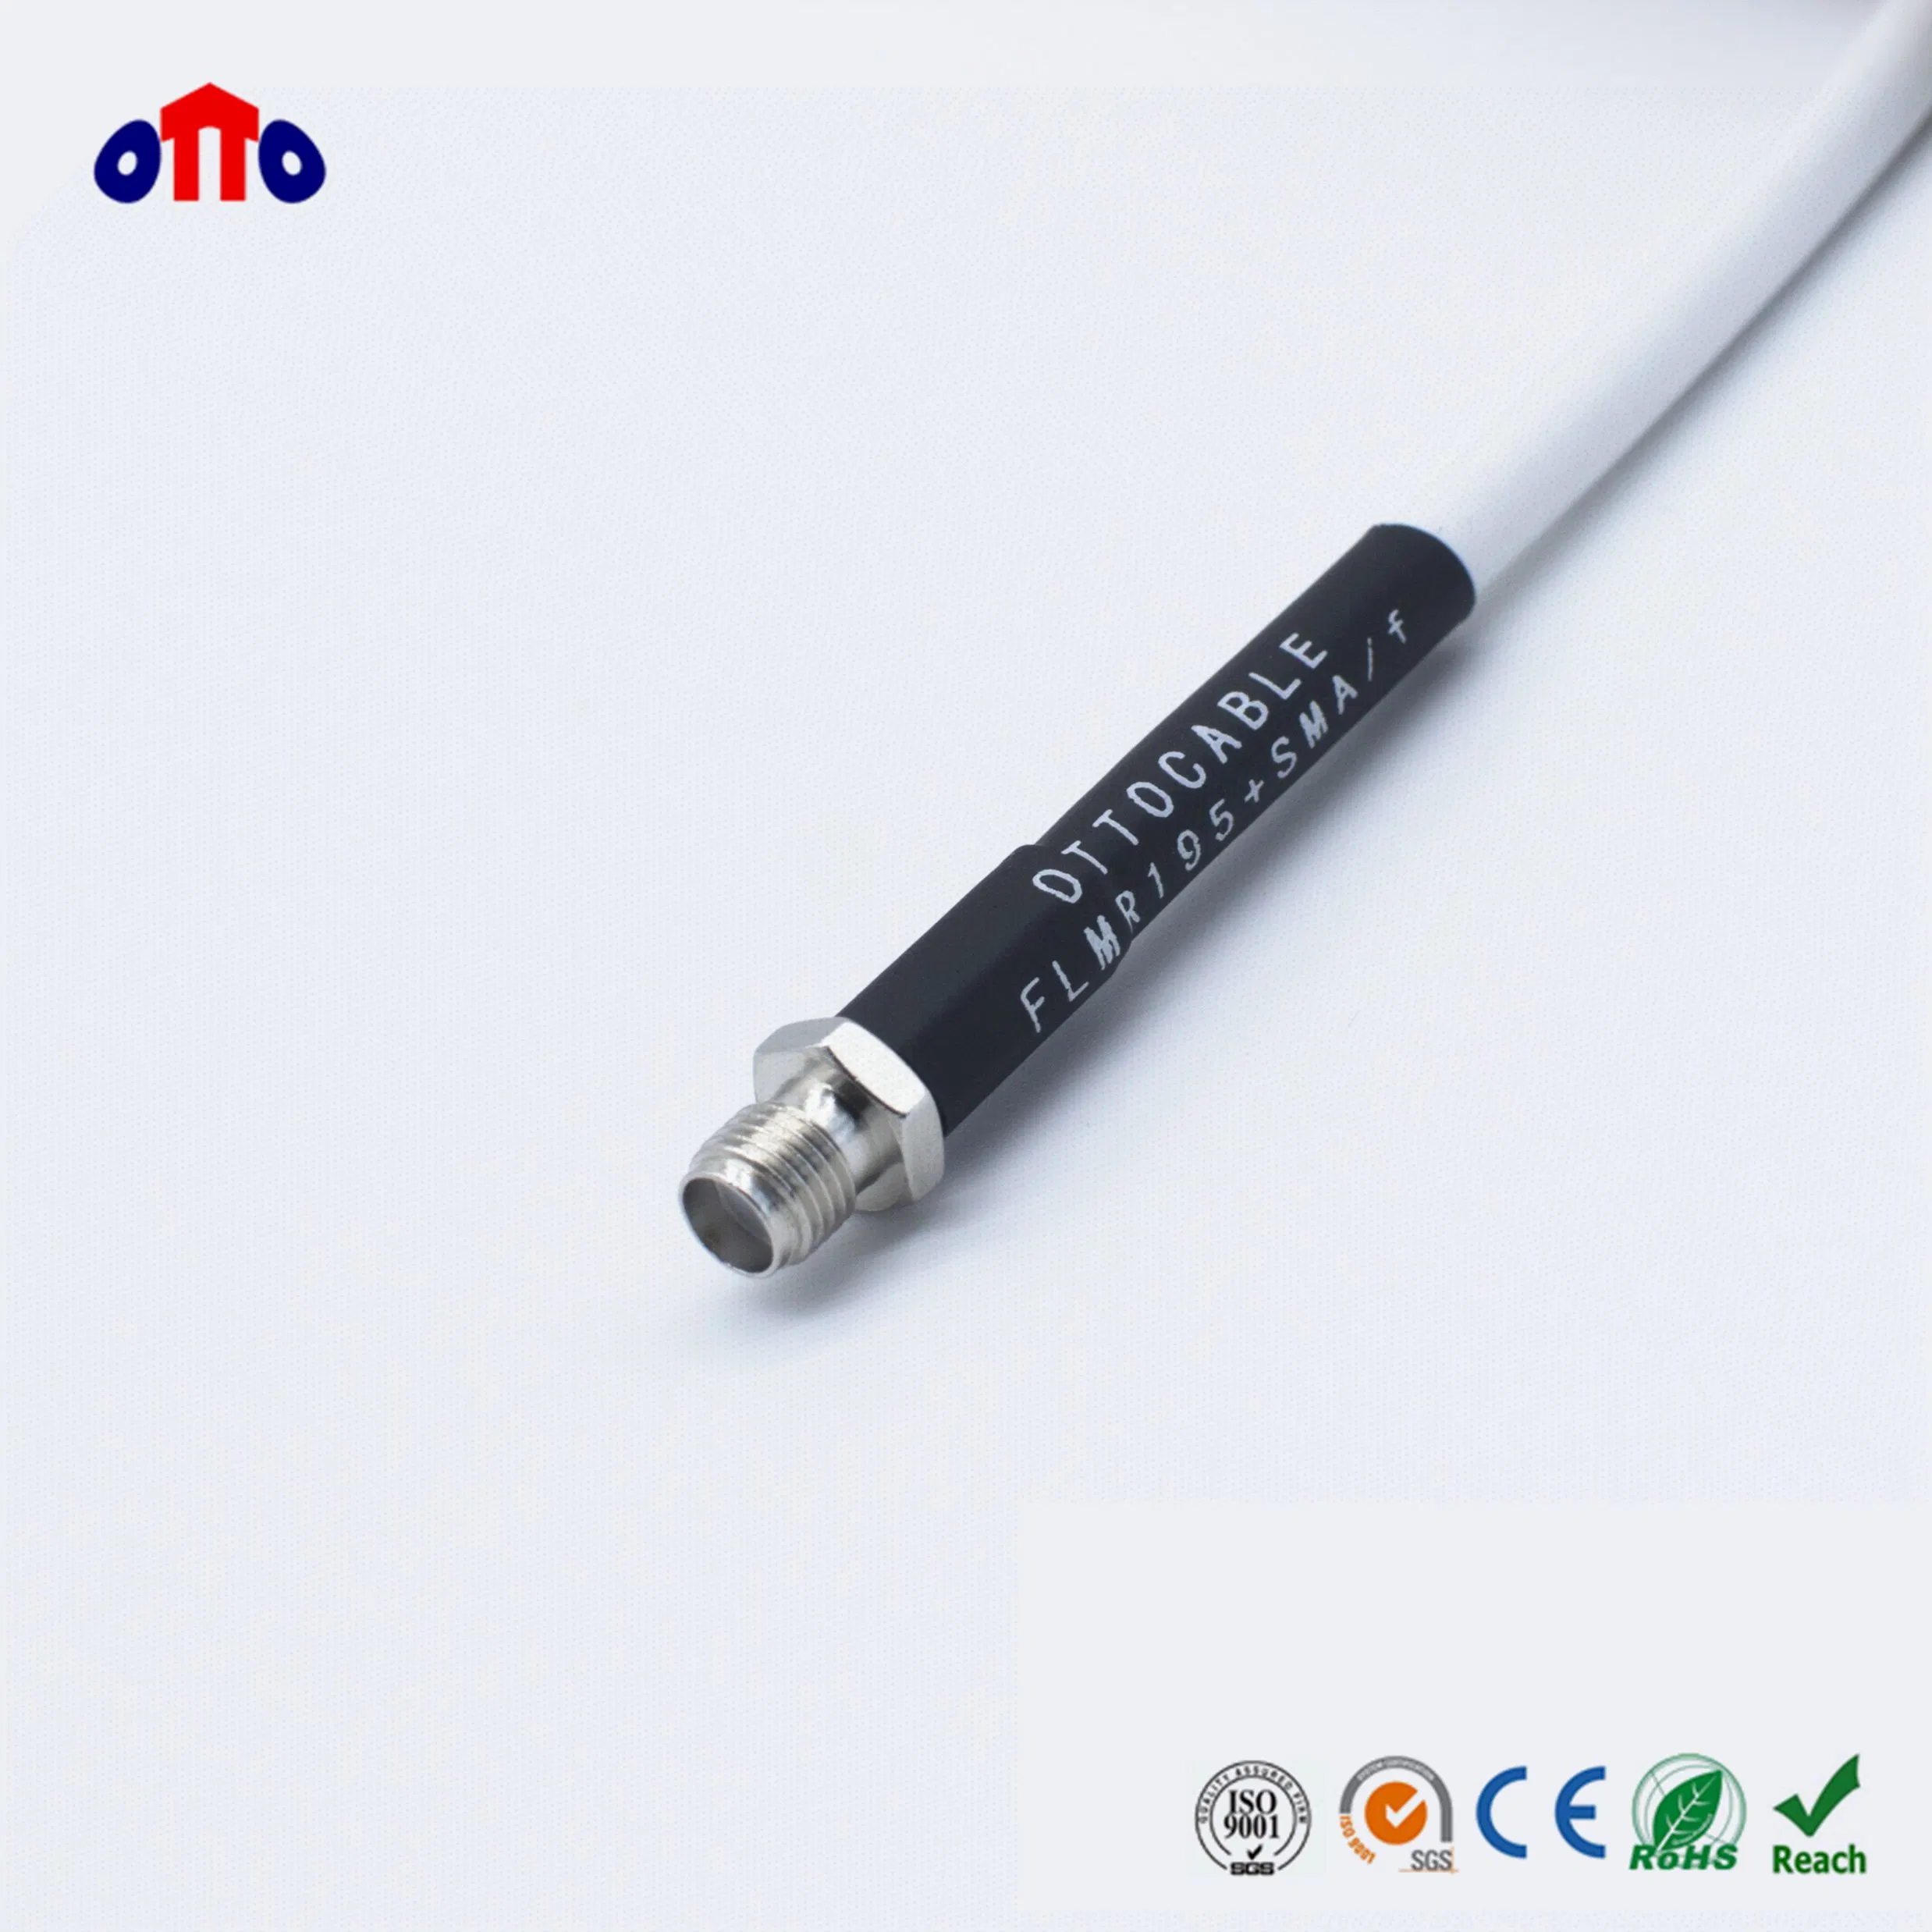 50 Ohm RF Coaxial Cable (LMR195)